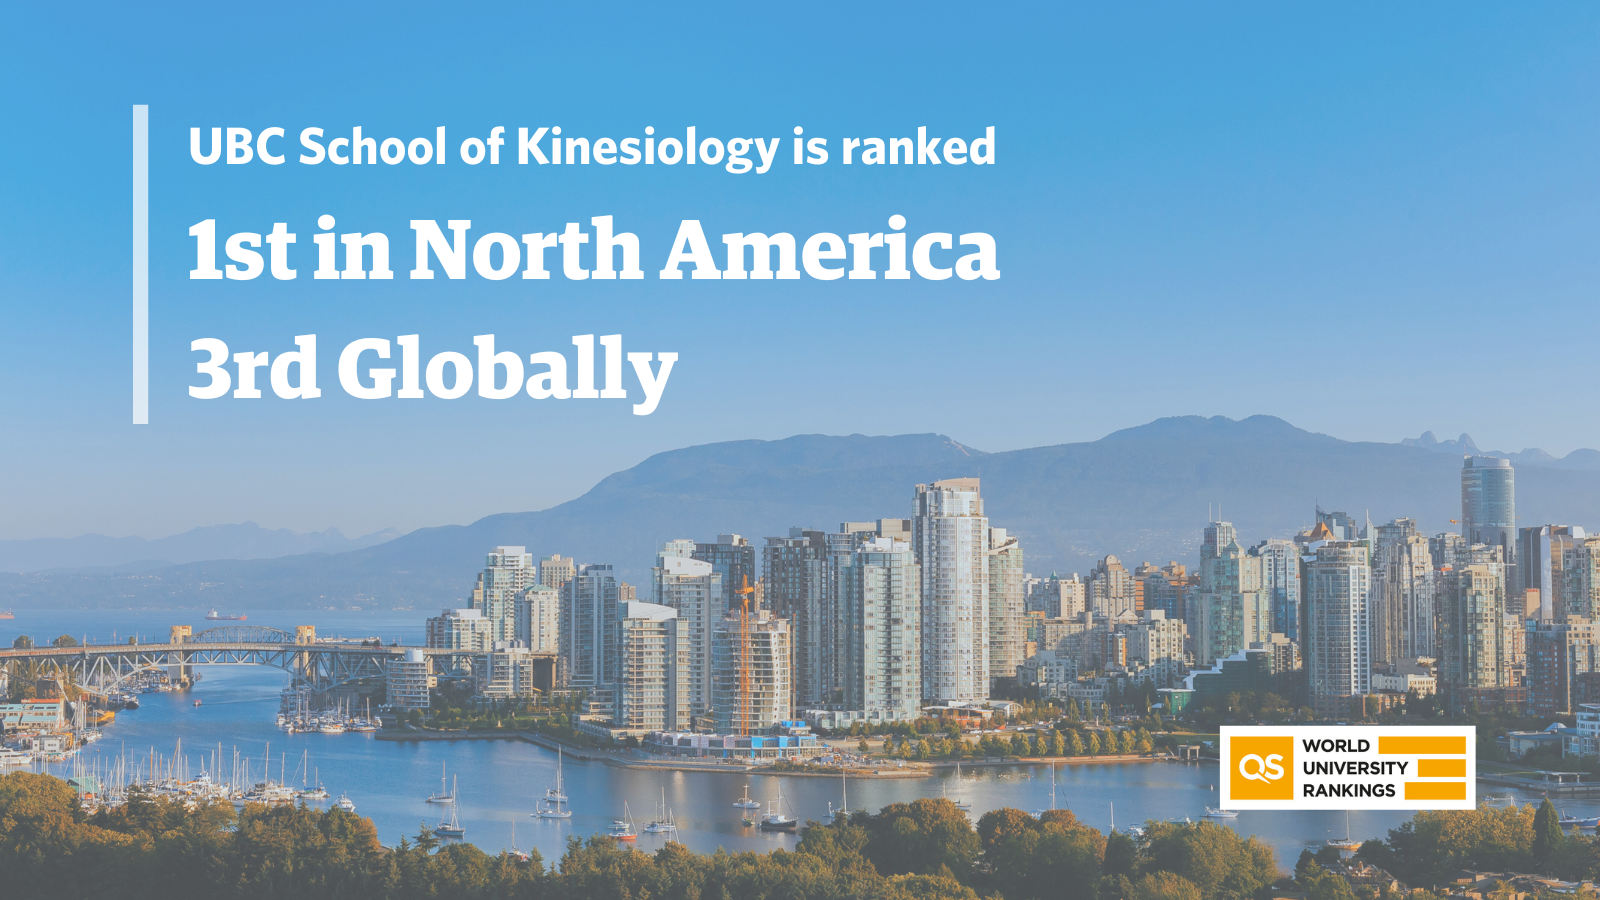 UBC School of Kinesiology is Ranked 1st in North America and 3rd Globally According to the QS World University Rankings 2024